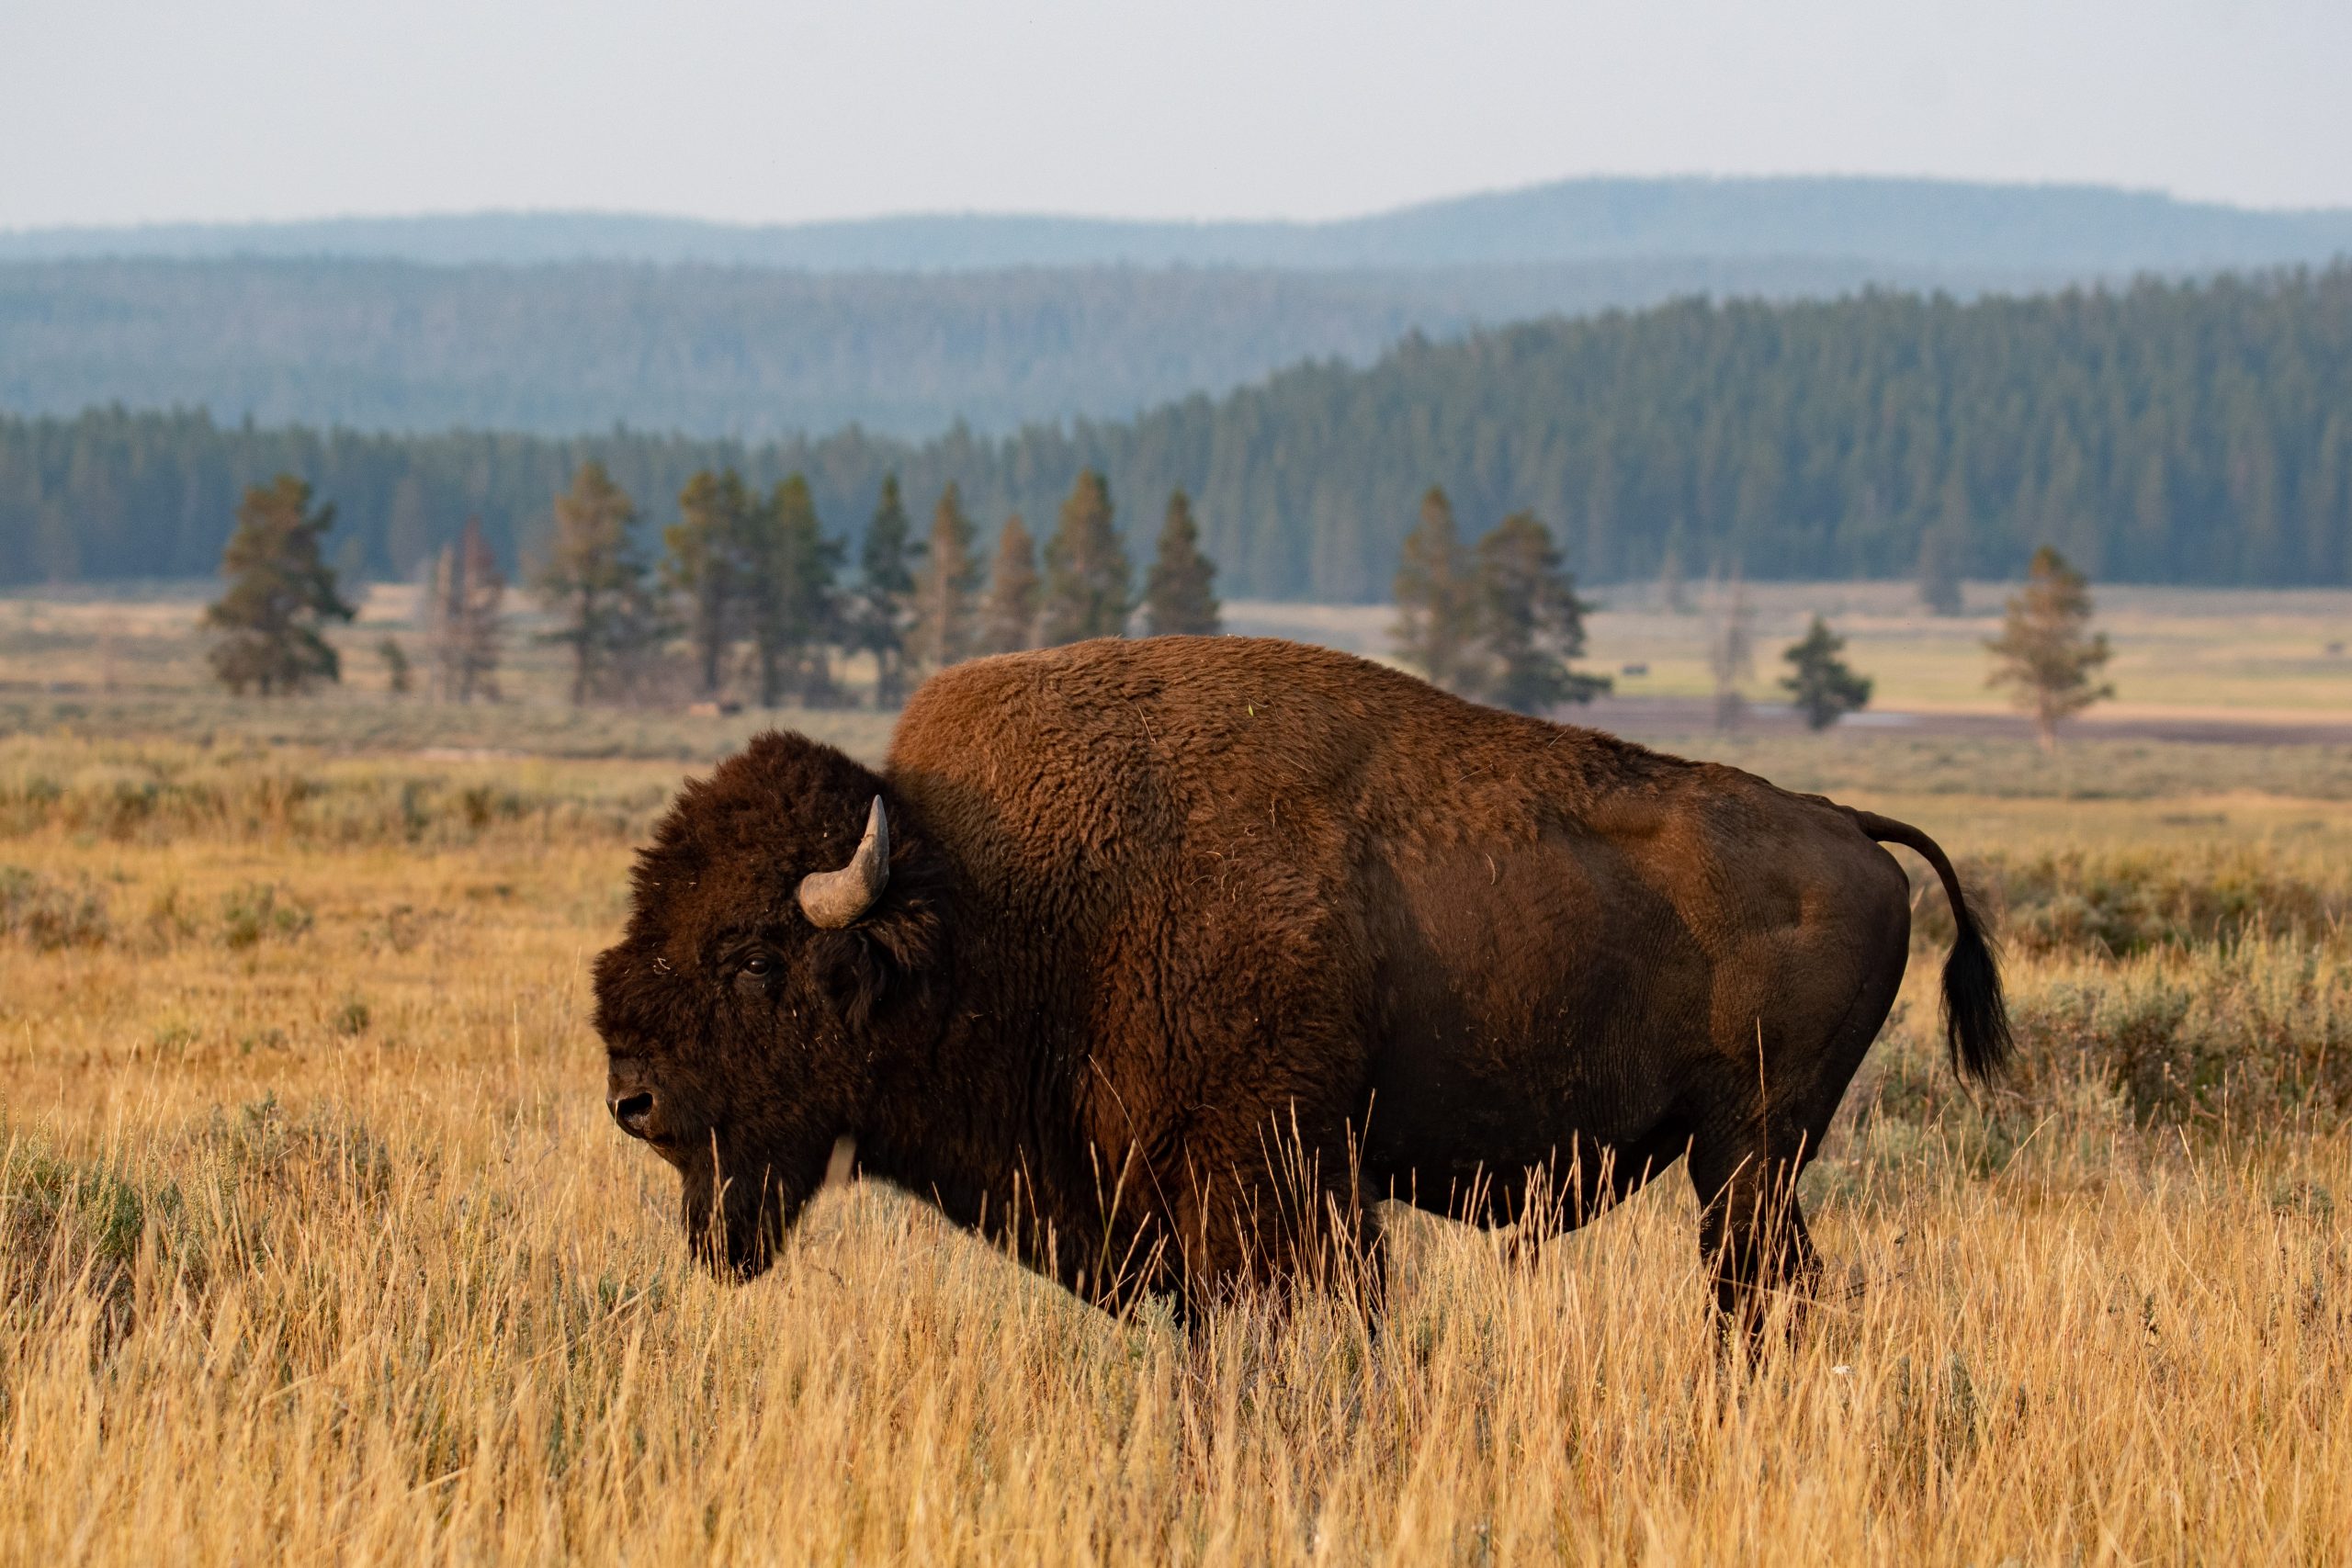 Bison standing alone in a field